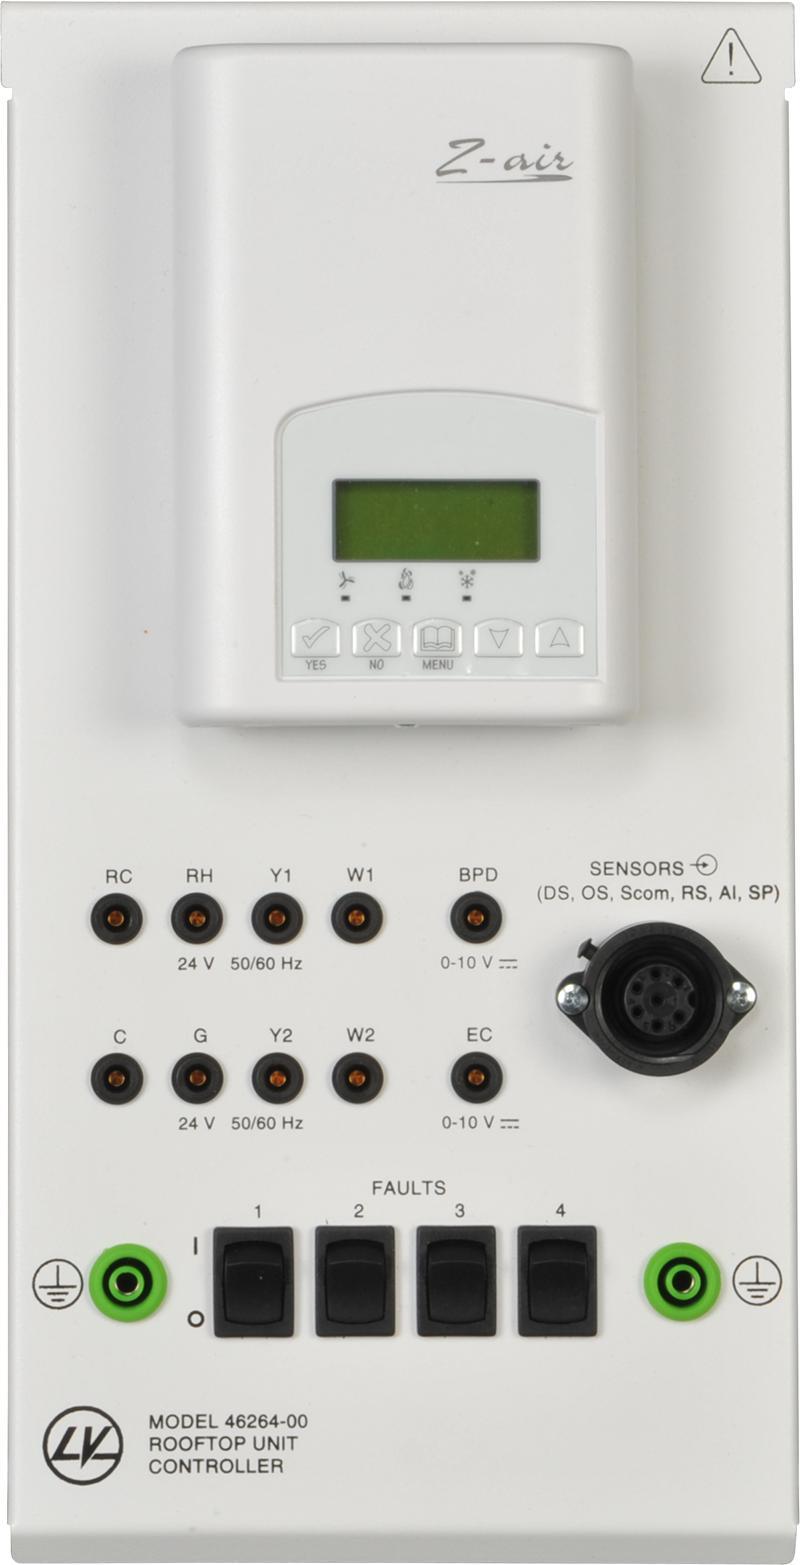 Rooftop Unit Controller 588279 (46264-00) as two ground terminals. The Rooftop Unit Controller is fitted with a typical rooftop unit controller in the module upper section.